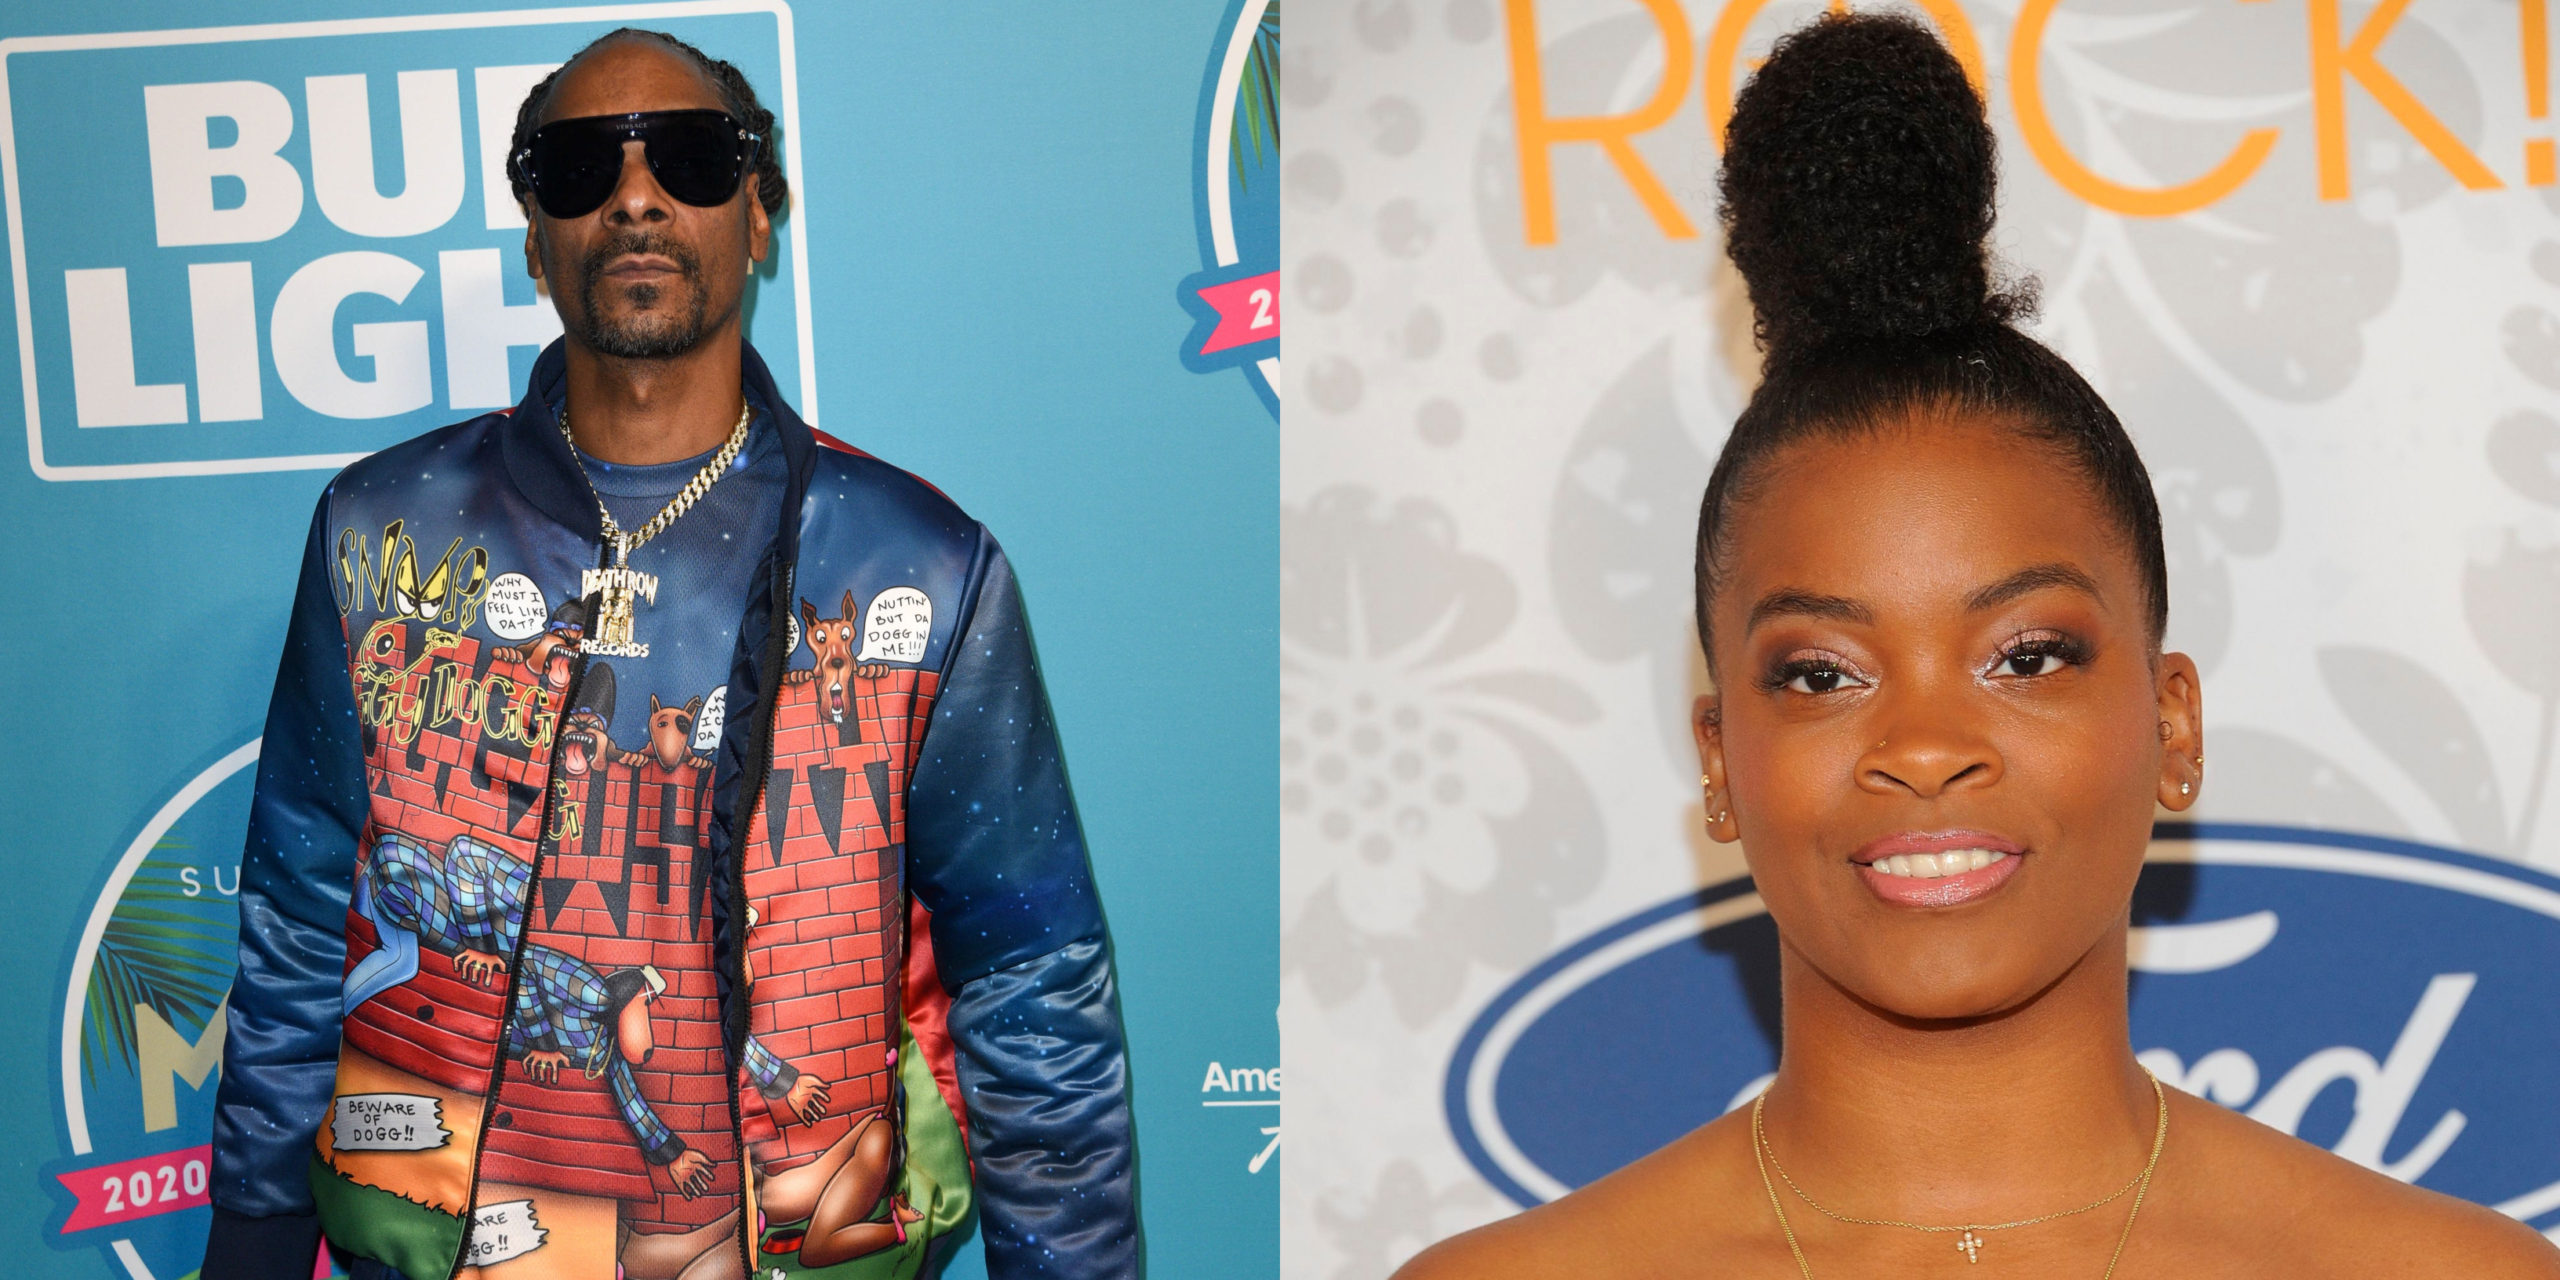 Snoop Dogg Gets Dragged After Giving Unsolicited Opinion About Ari Lennox's Hair